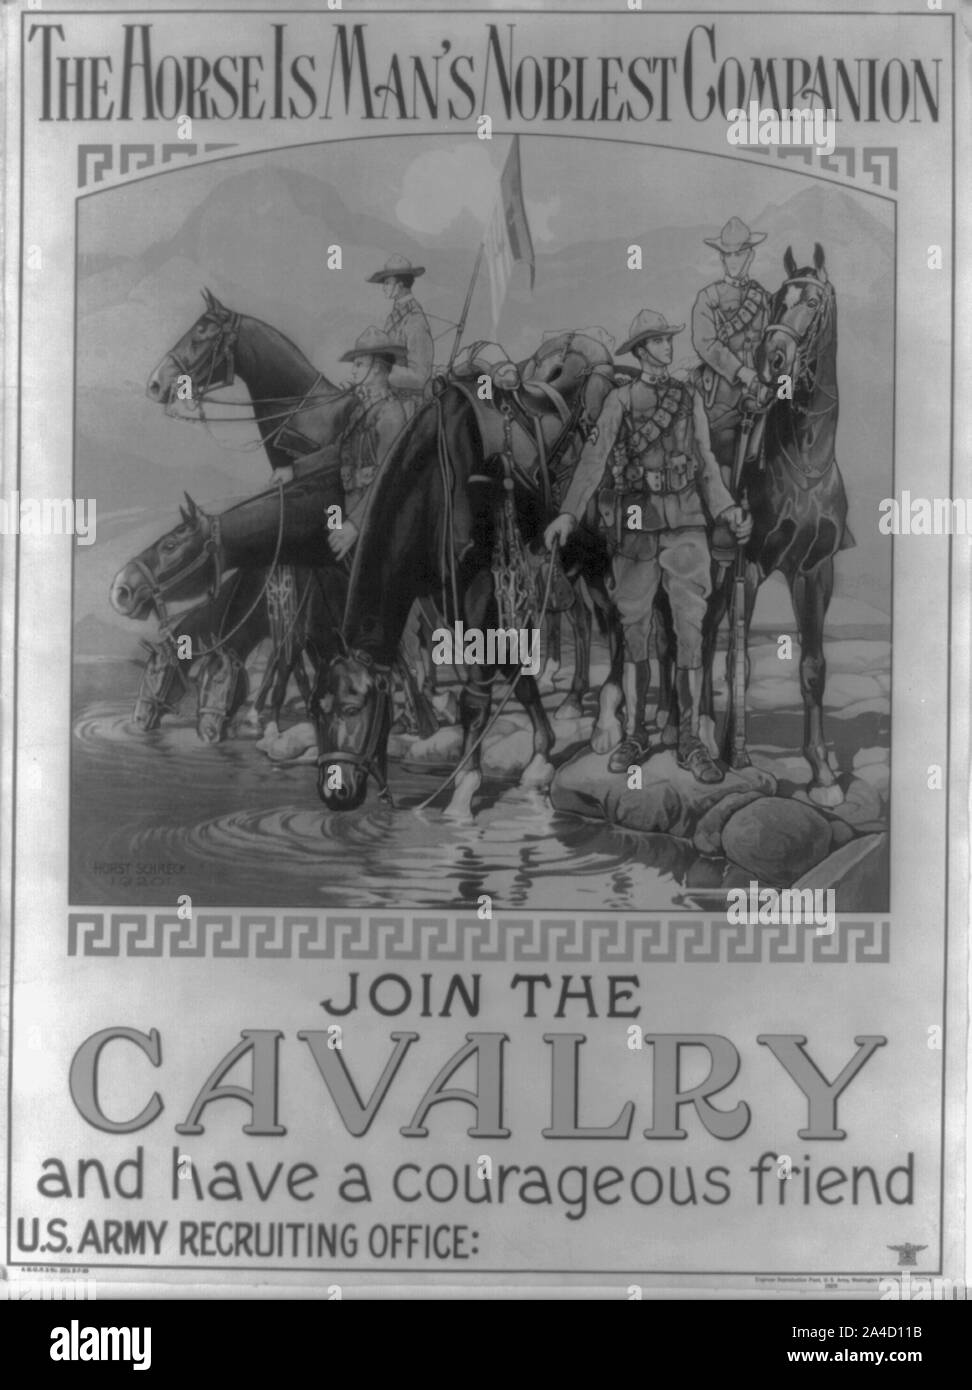 The  horse is man's noblest companion - join the cavalry and have a courageous friend Stock Photo